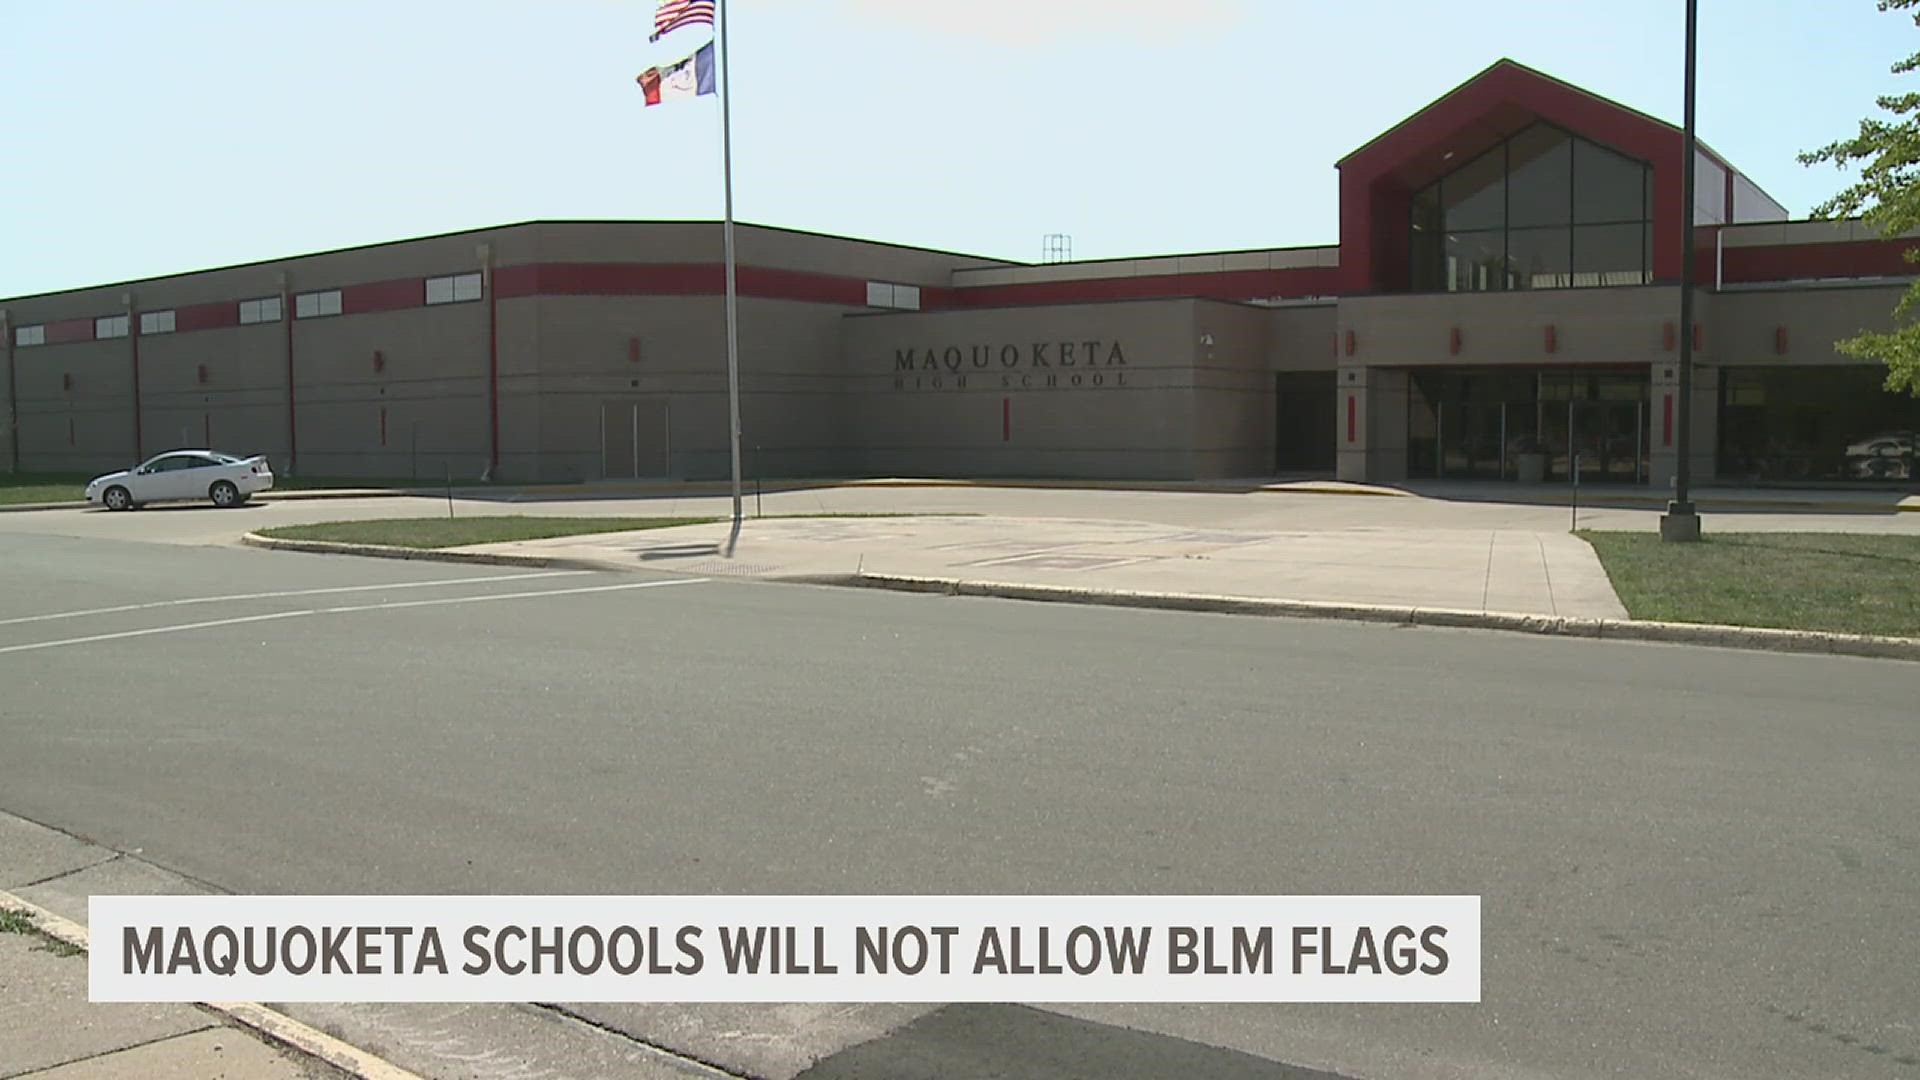 The district elected to remove a Black Lives Matter flag from a MHS classroom on grounds that it represents political expression, despite a LGBTQ+ flag remaining.